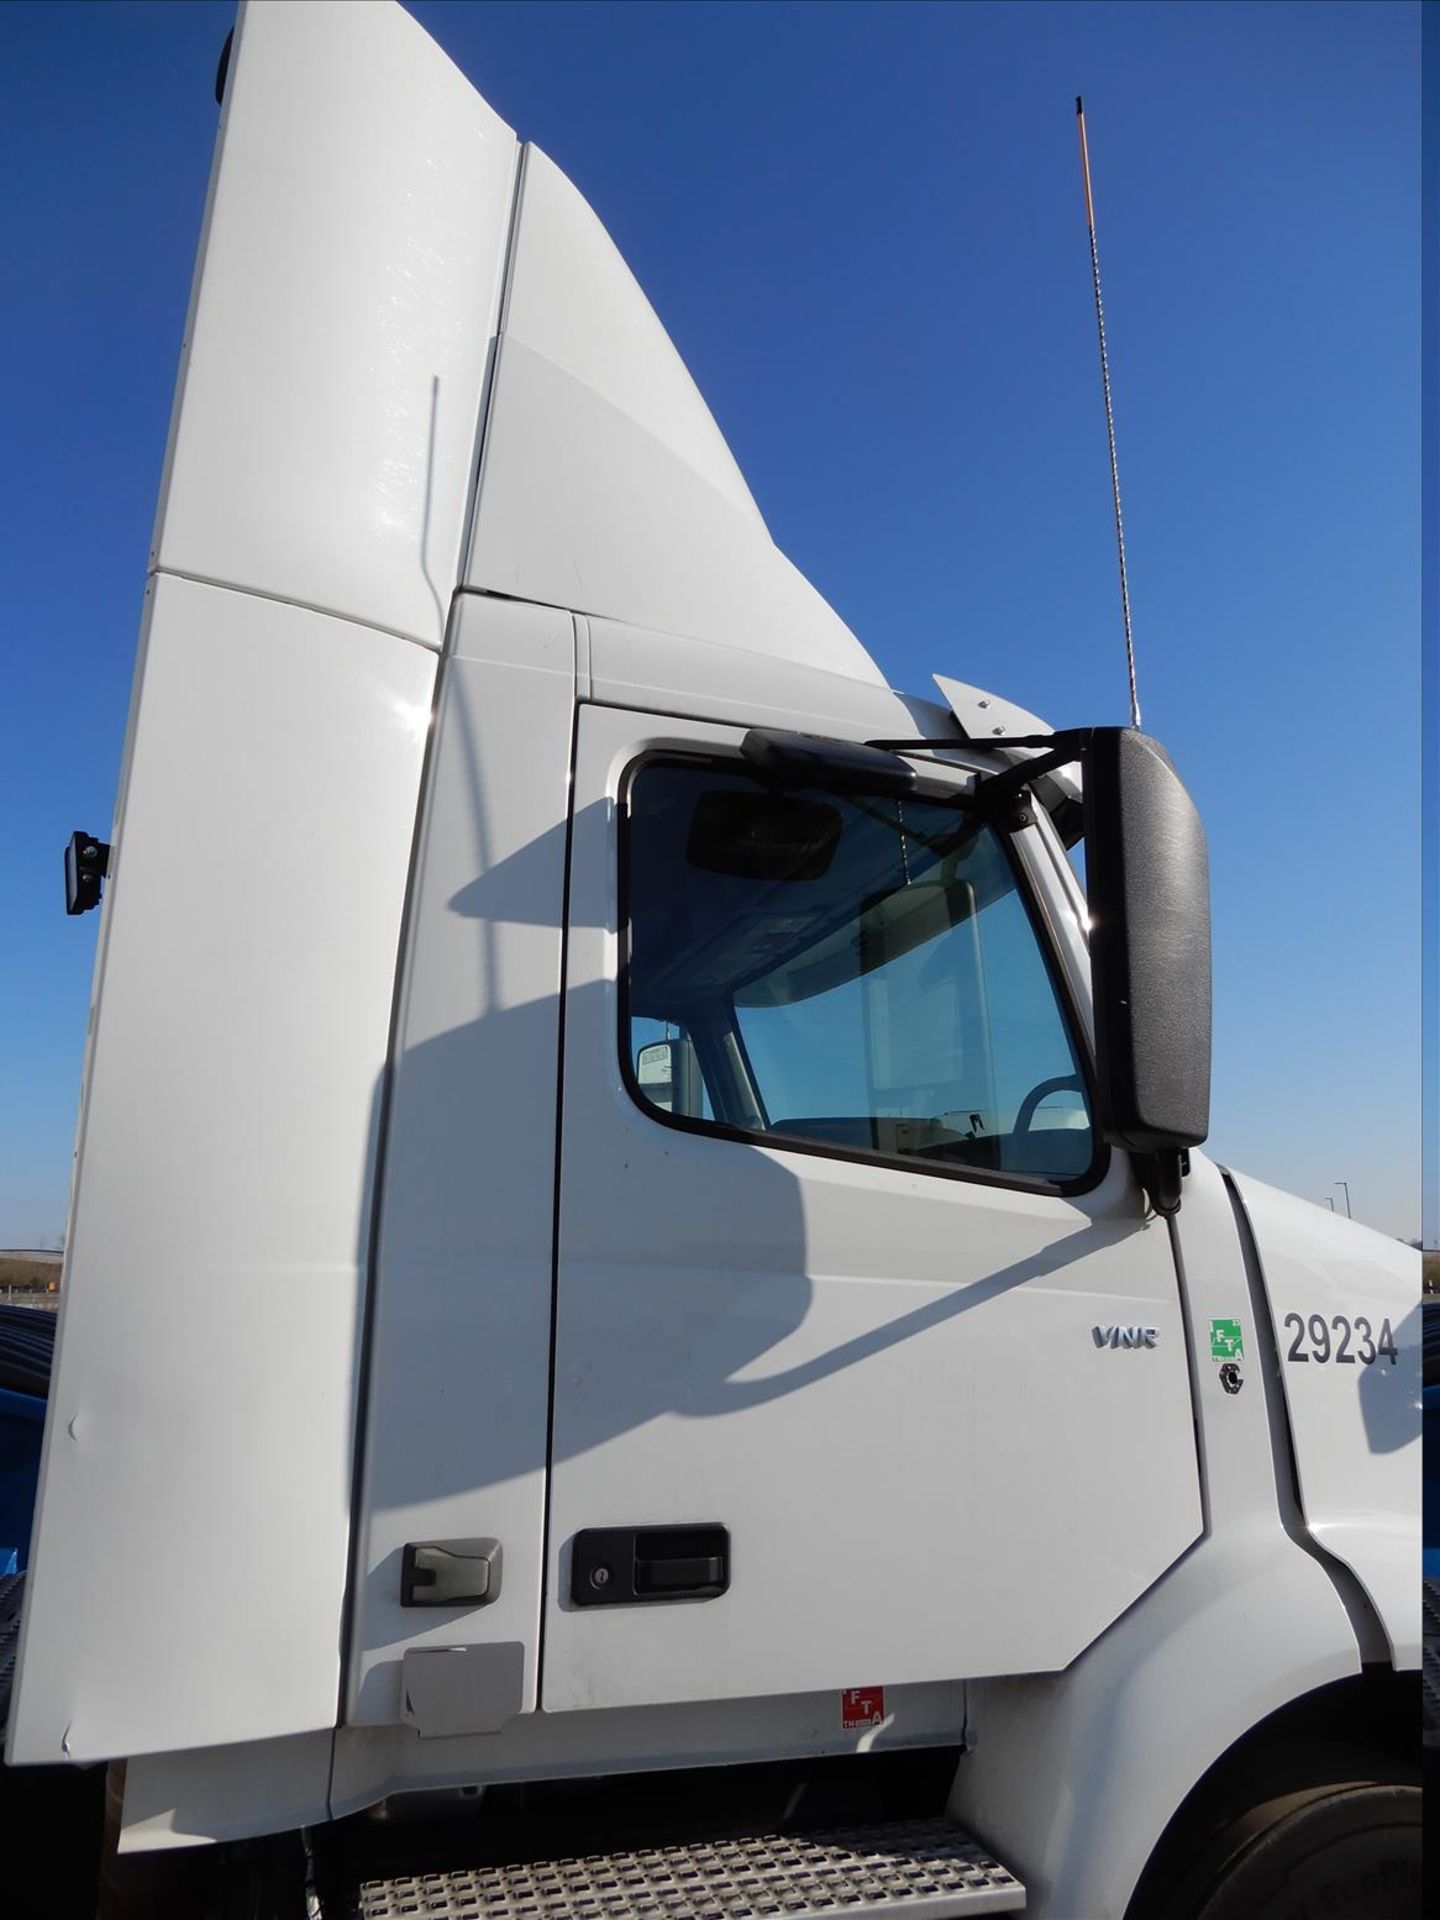 2019 Volvo VNR 300 Daycab Truck Tractor - Located in Indianapolis, IN - Image 26 of 61